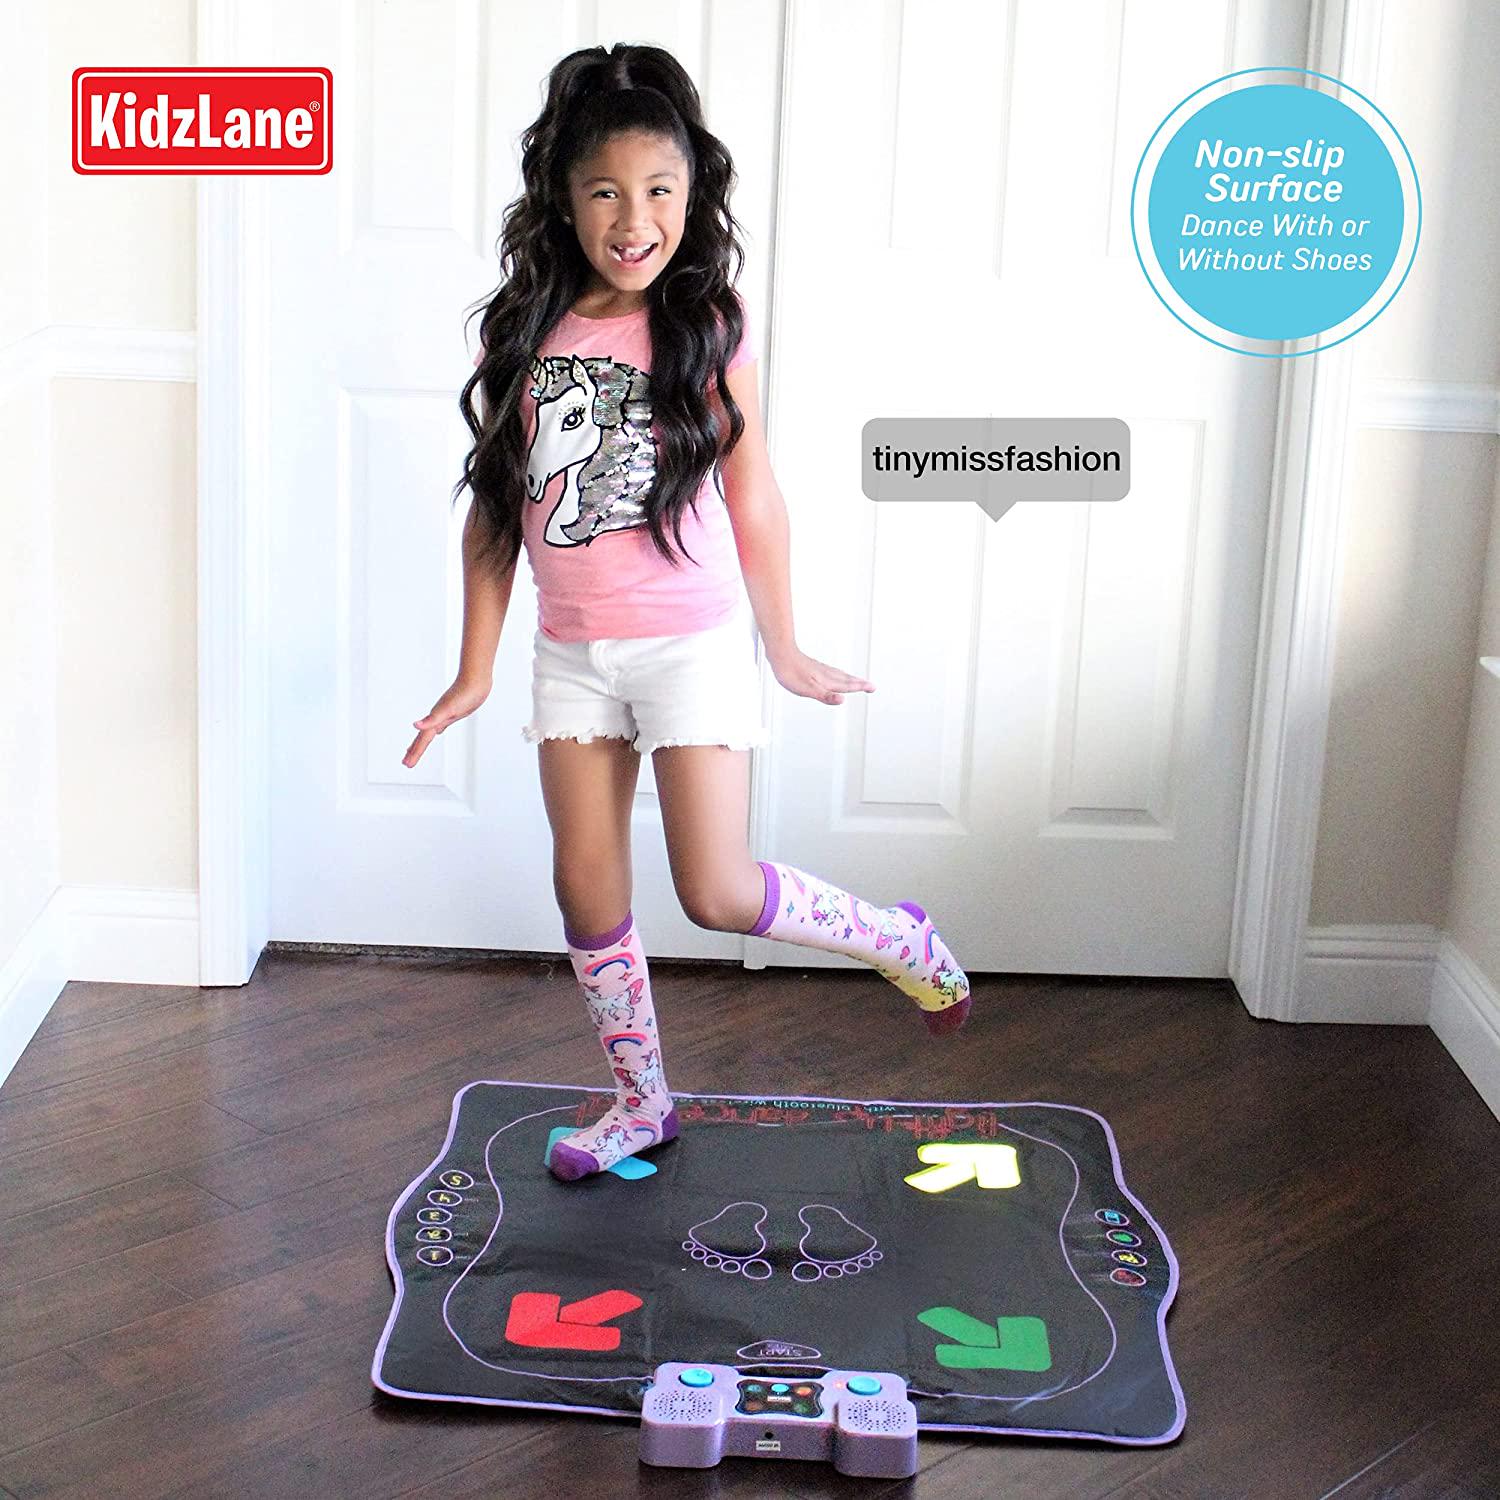 kidzlane, Light Up Dance Mat - Arcade Style Dance Games with Built In Music Tracks and Bluetooth Wireless Technology